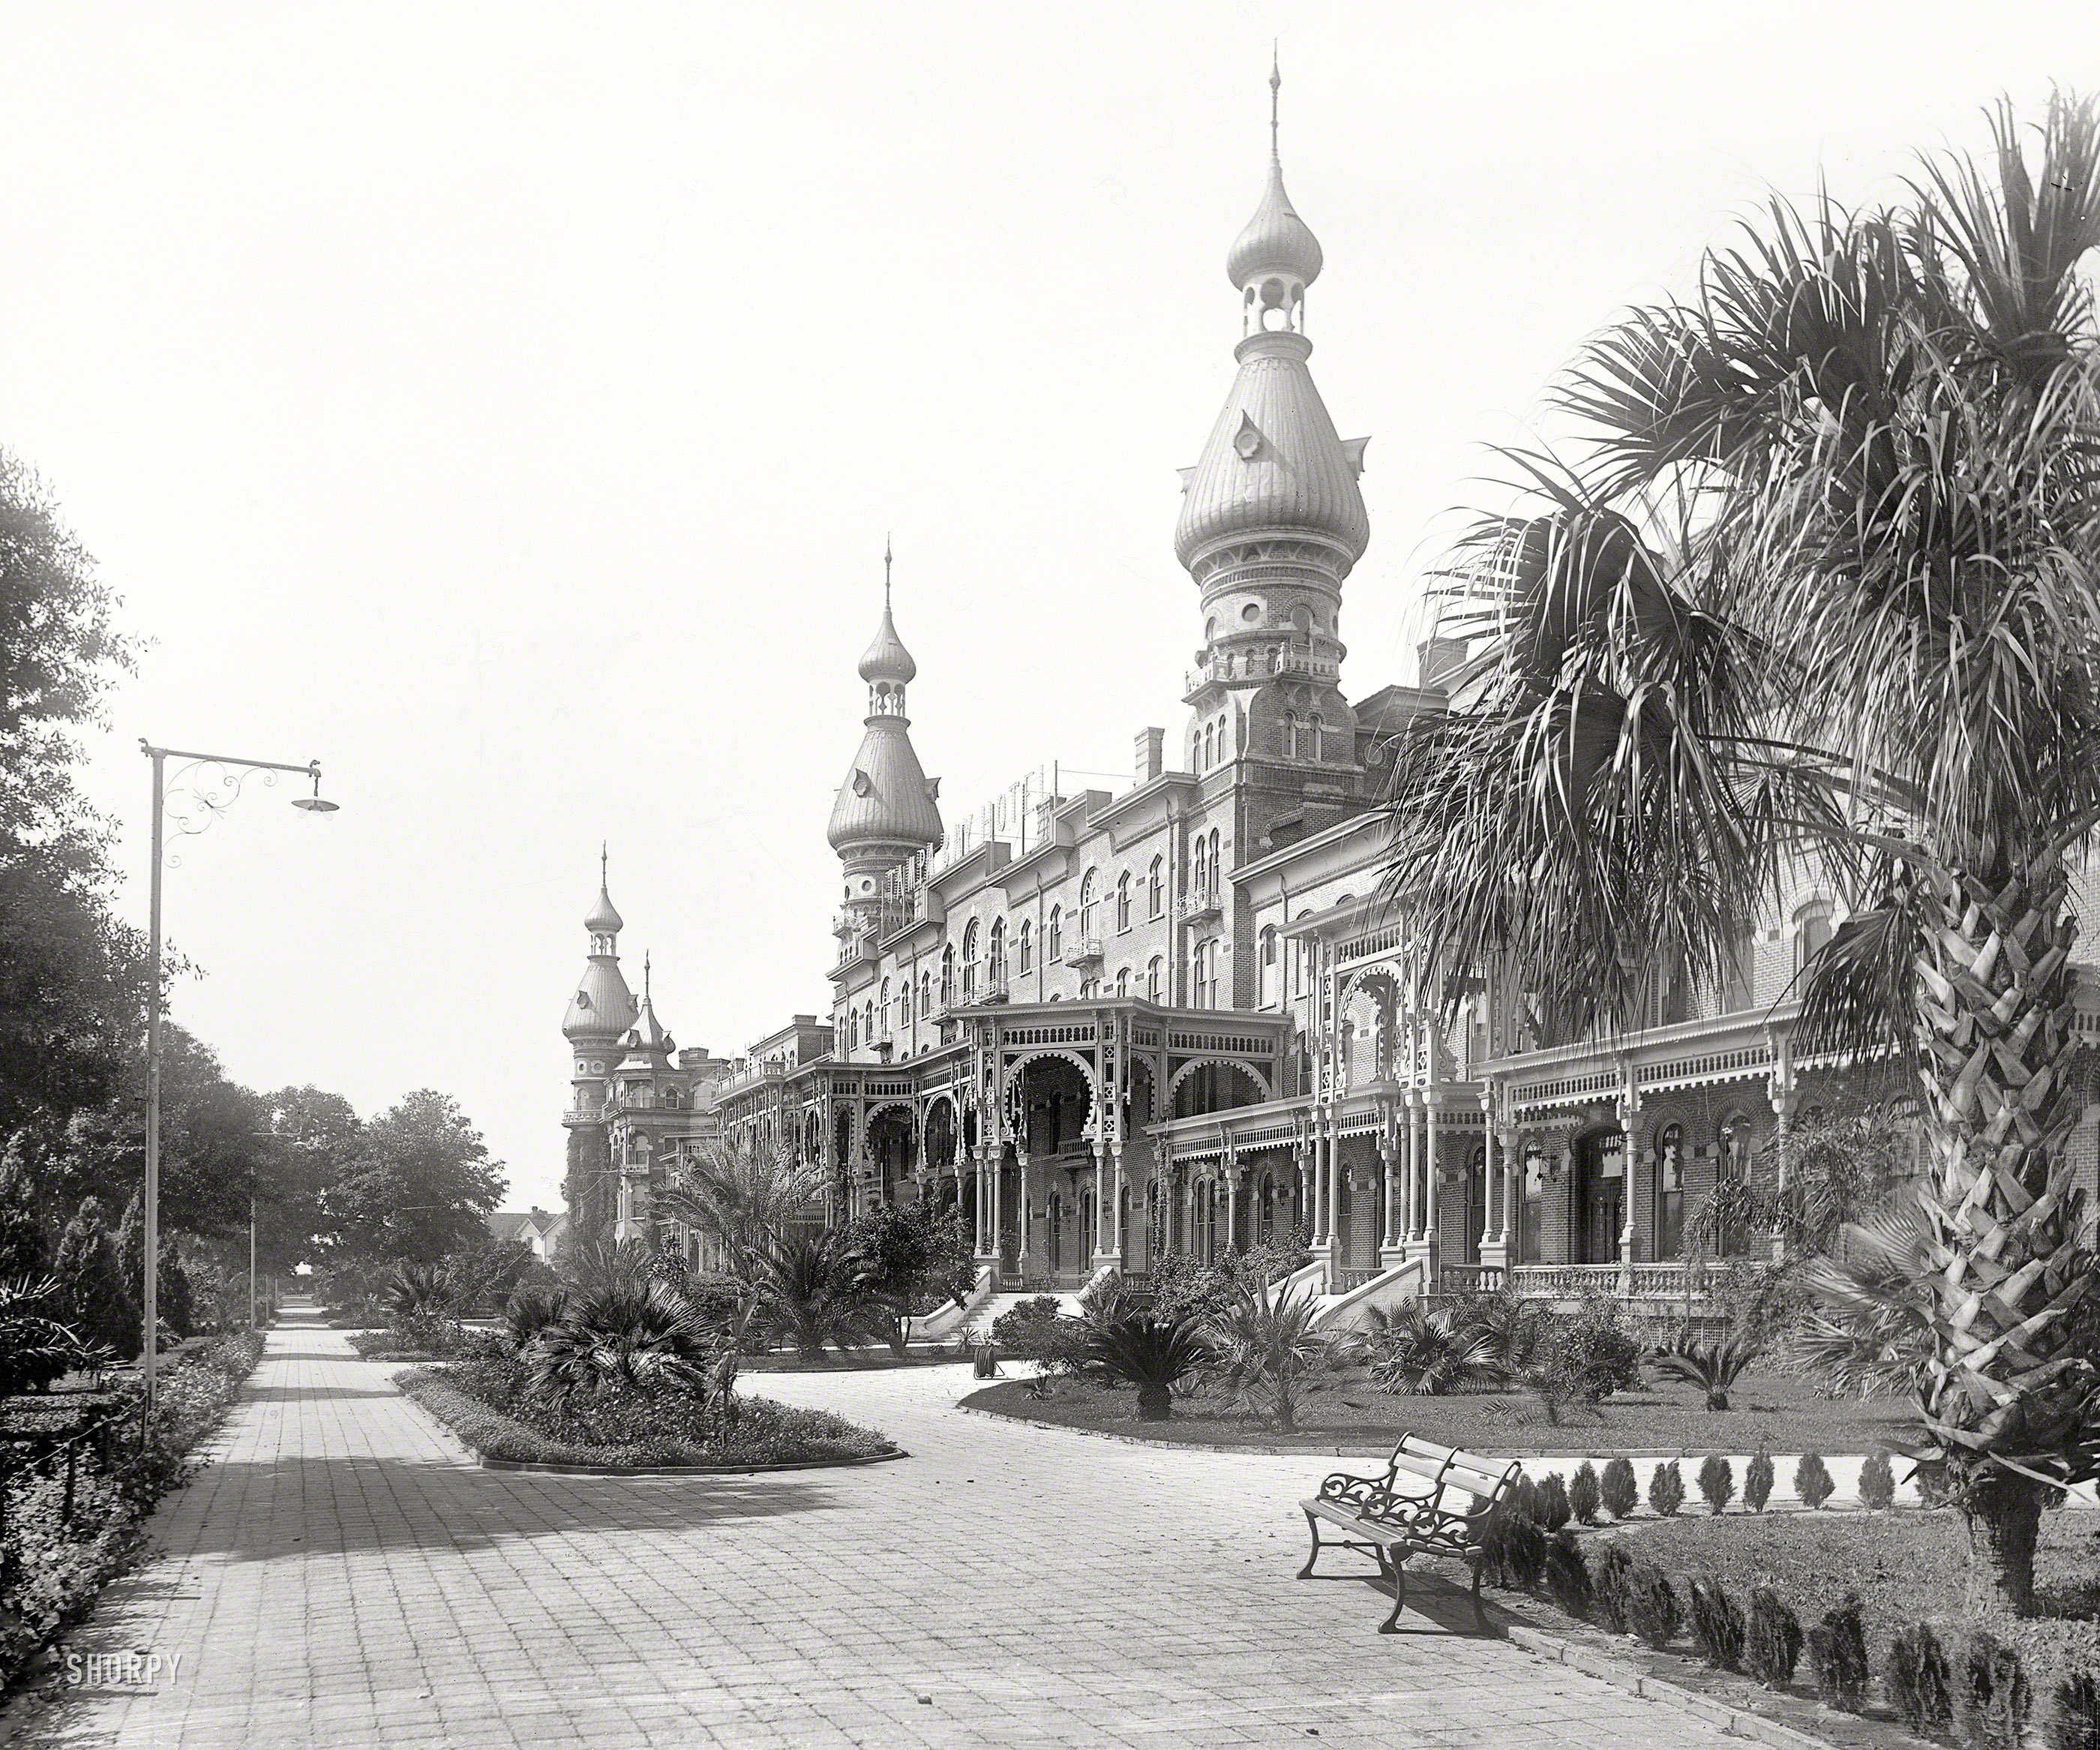 Florida circa 1900. "Tampa Bay Hotel." A 500-room resort opened in 1891 by steamship and railroad magnate Henry Plant, now home to the Henry B. Plant Museum on the University of Tampa campus. 8x10 glass negative. View full size.